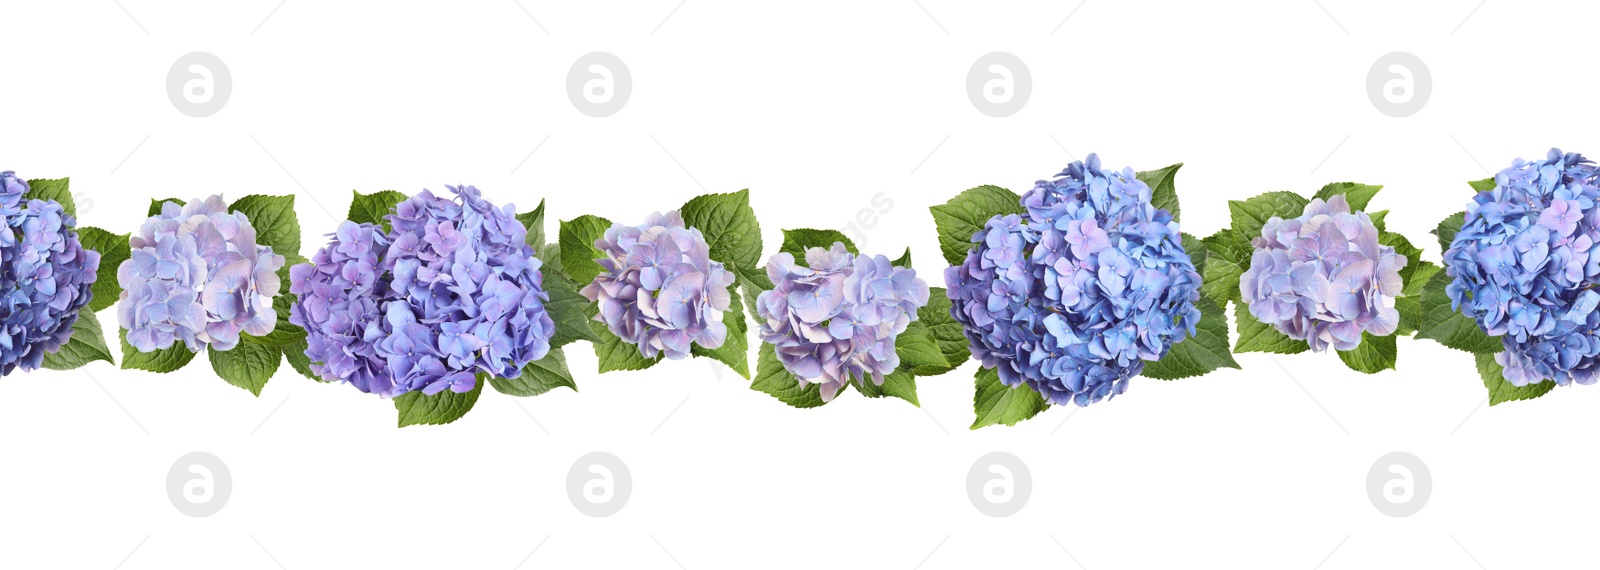 Image of Delicate beautiful hortensia flowers with green leaves on white background, top view. Banner design